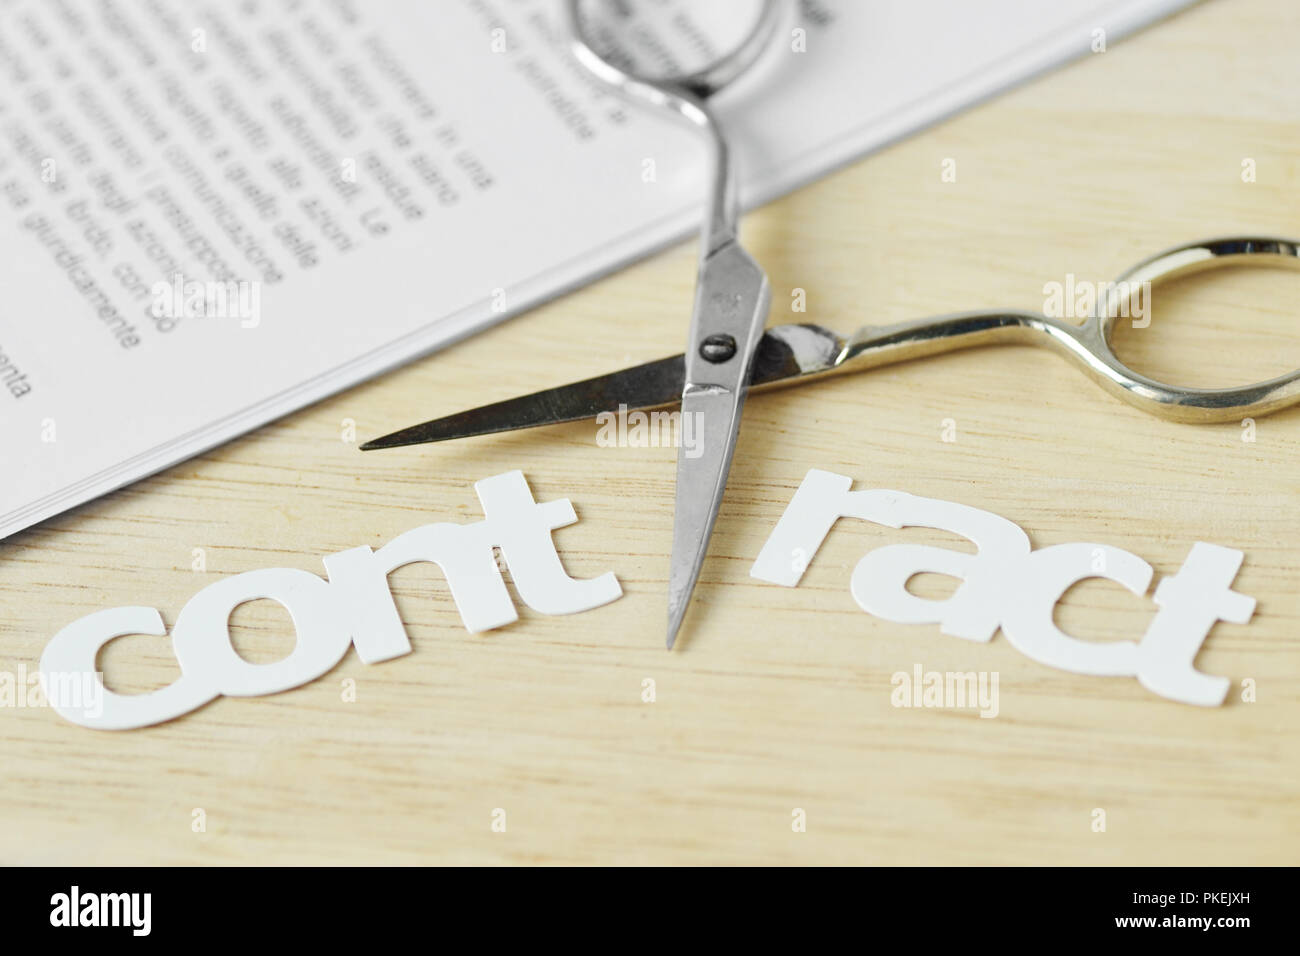 Scissors cutting the word Contract - Contract termination concept Stock Photo